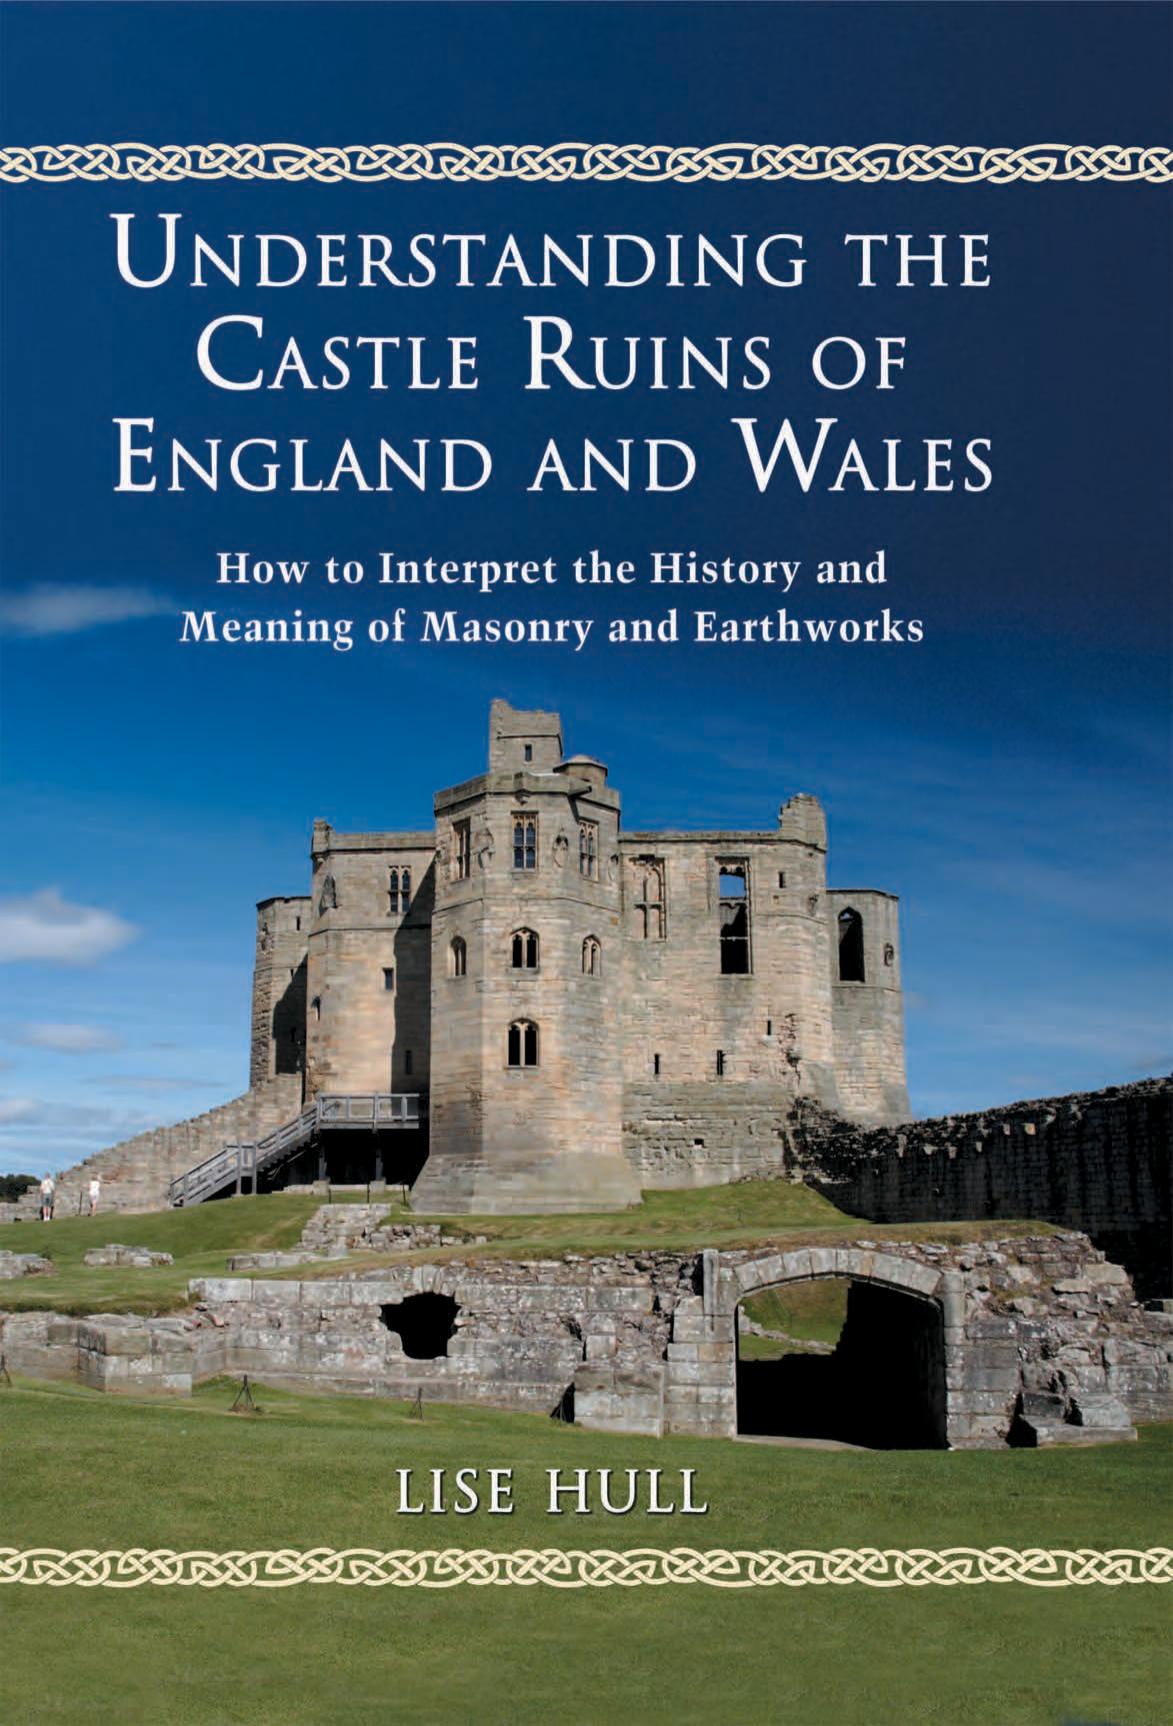 Understanding the Castle Ruins of England and Wales by Lise Hull